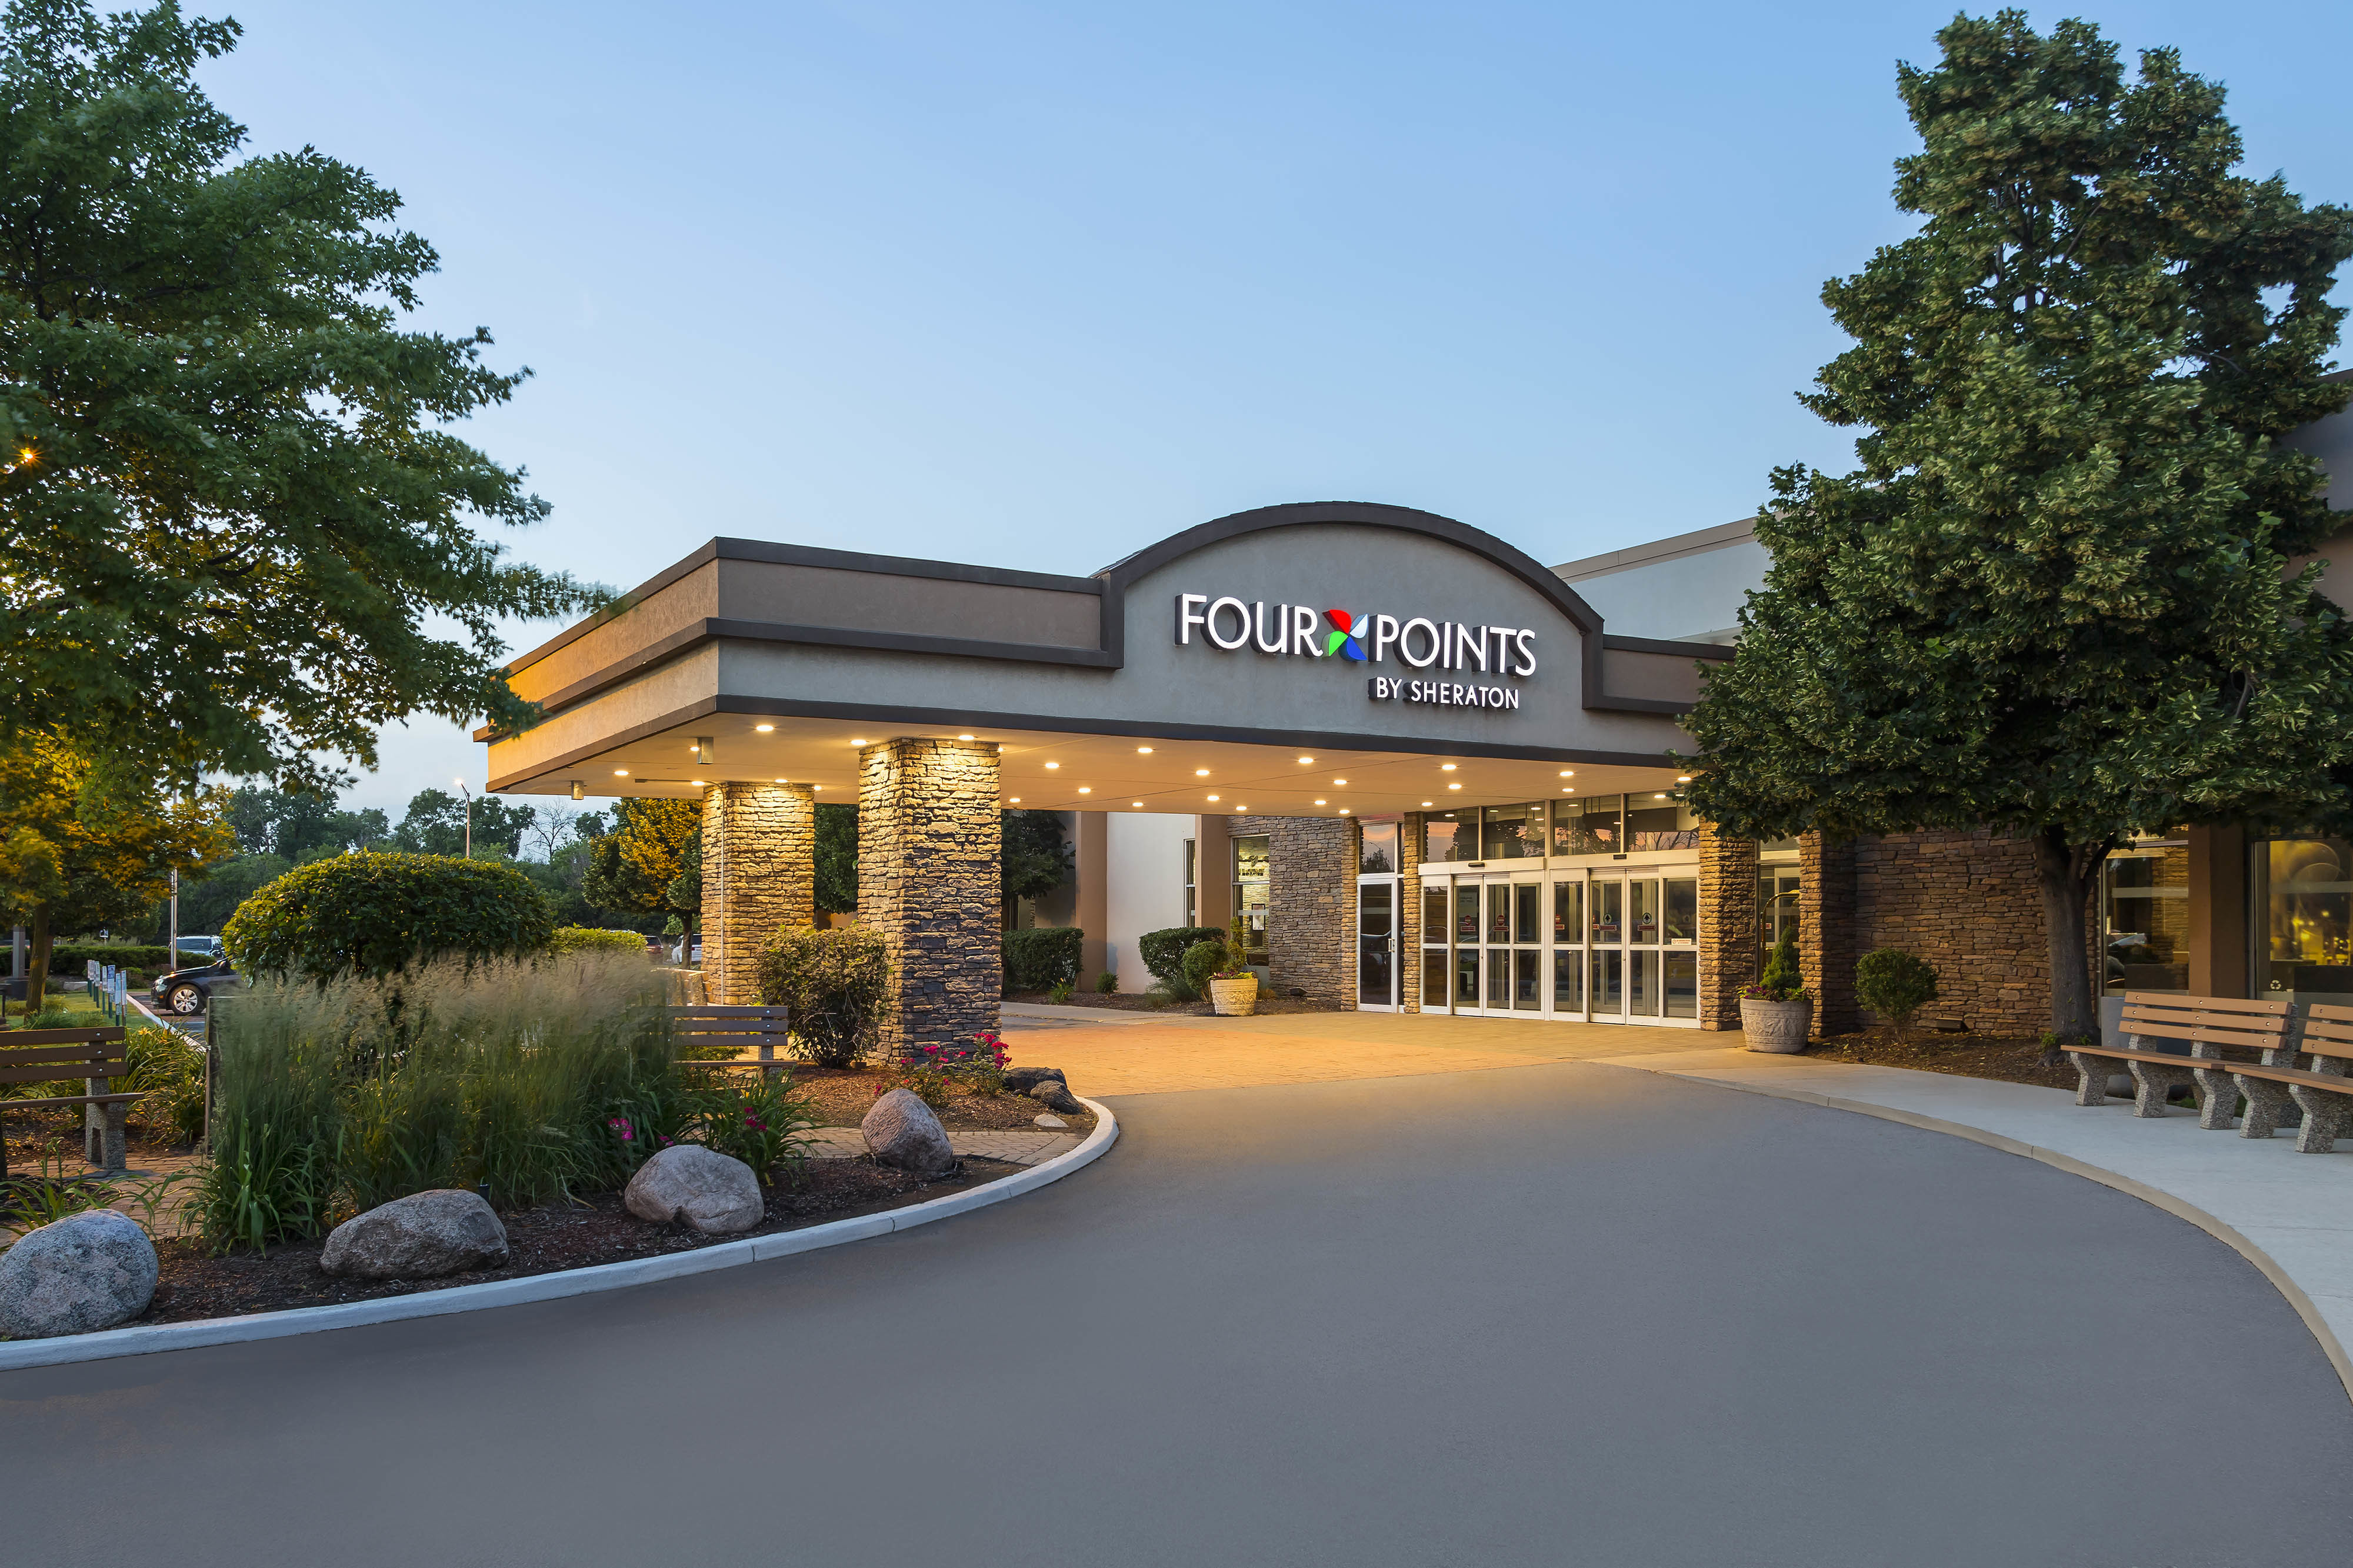 Photo of Four Points by Sheraton Chicago O'Hare Airport, Schiller Park, IL